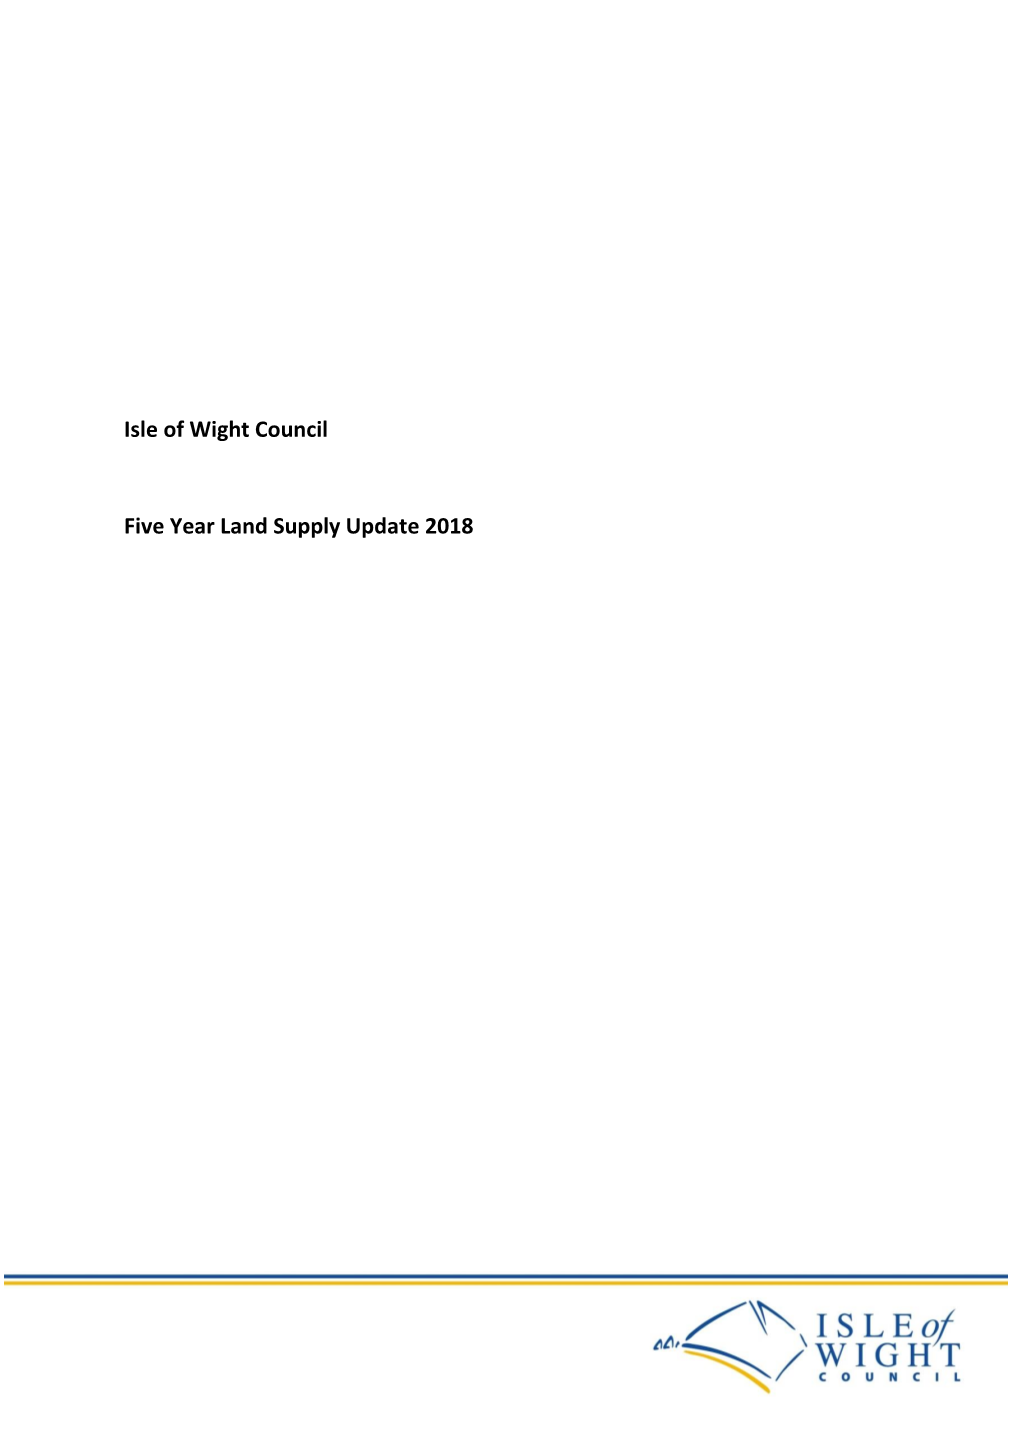 Isle of Wight Council Five Year Land Supply Update 2018